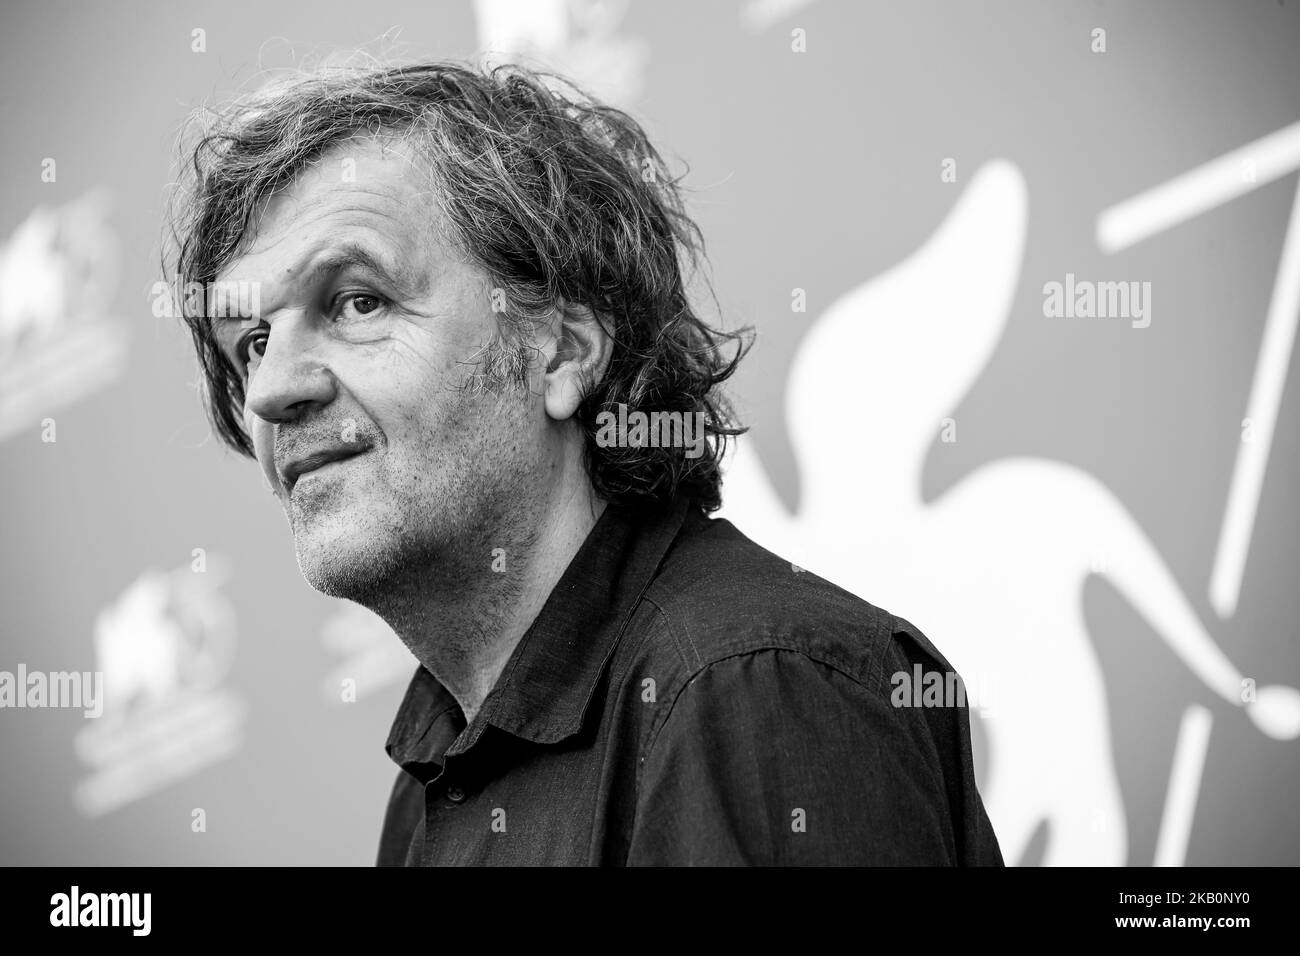 (EDITORS NOTE: Image has been converted to black and white) Emir Kusturica attends 'El Pepe, A Supreme Life (El Pepe, Una Vida Suprema)' photocall during the 75th Venice Film Festival on September 3, 2018 in Venice, Italy. (Photo by Matteo Chinellato/NurPhoto) Stock Photo